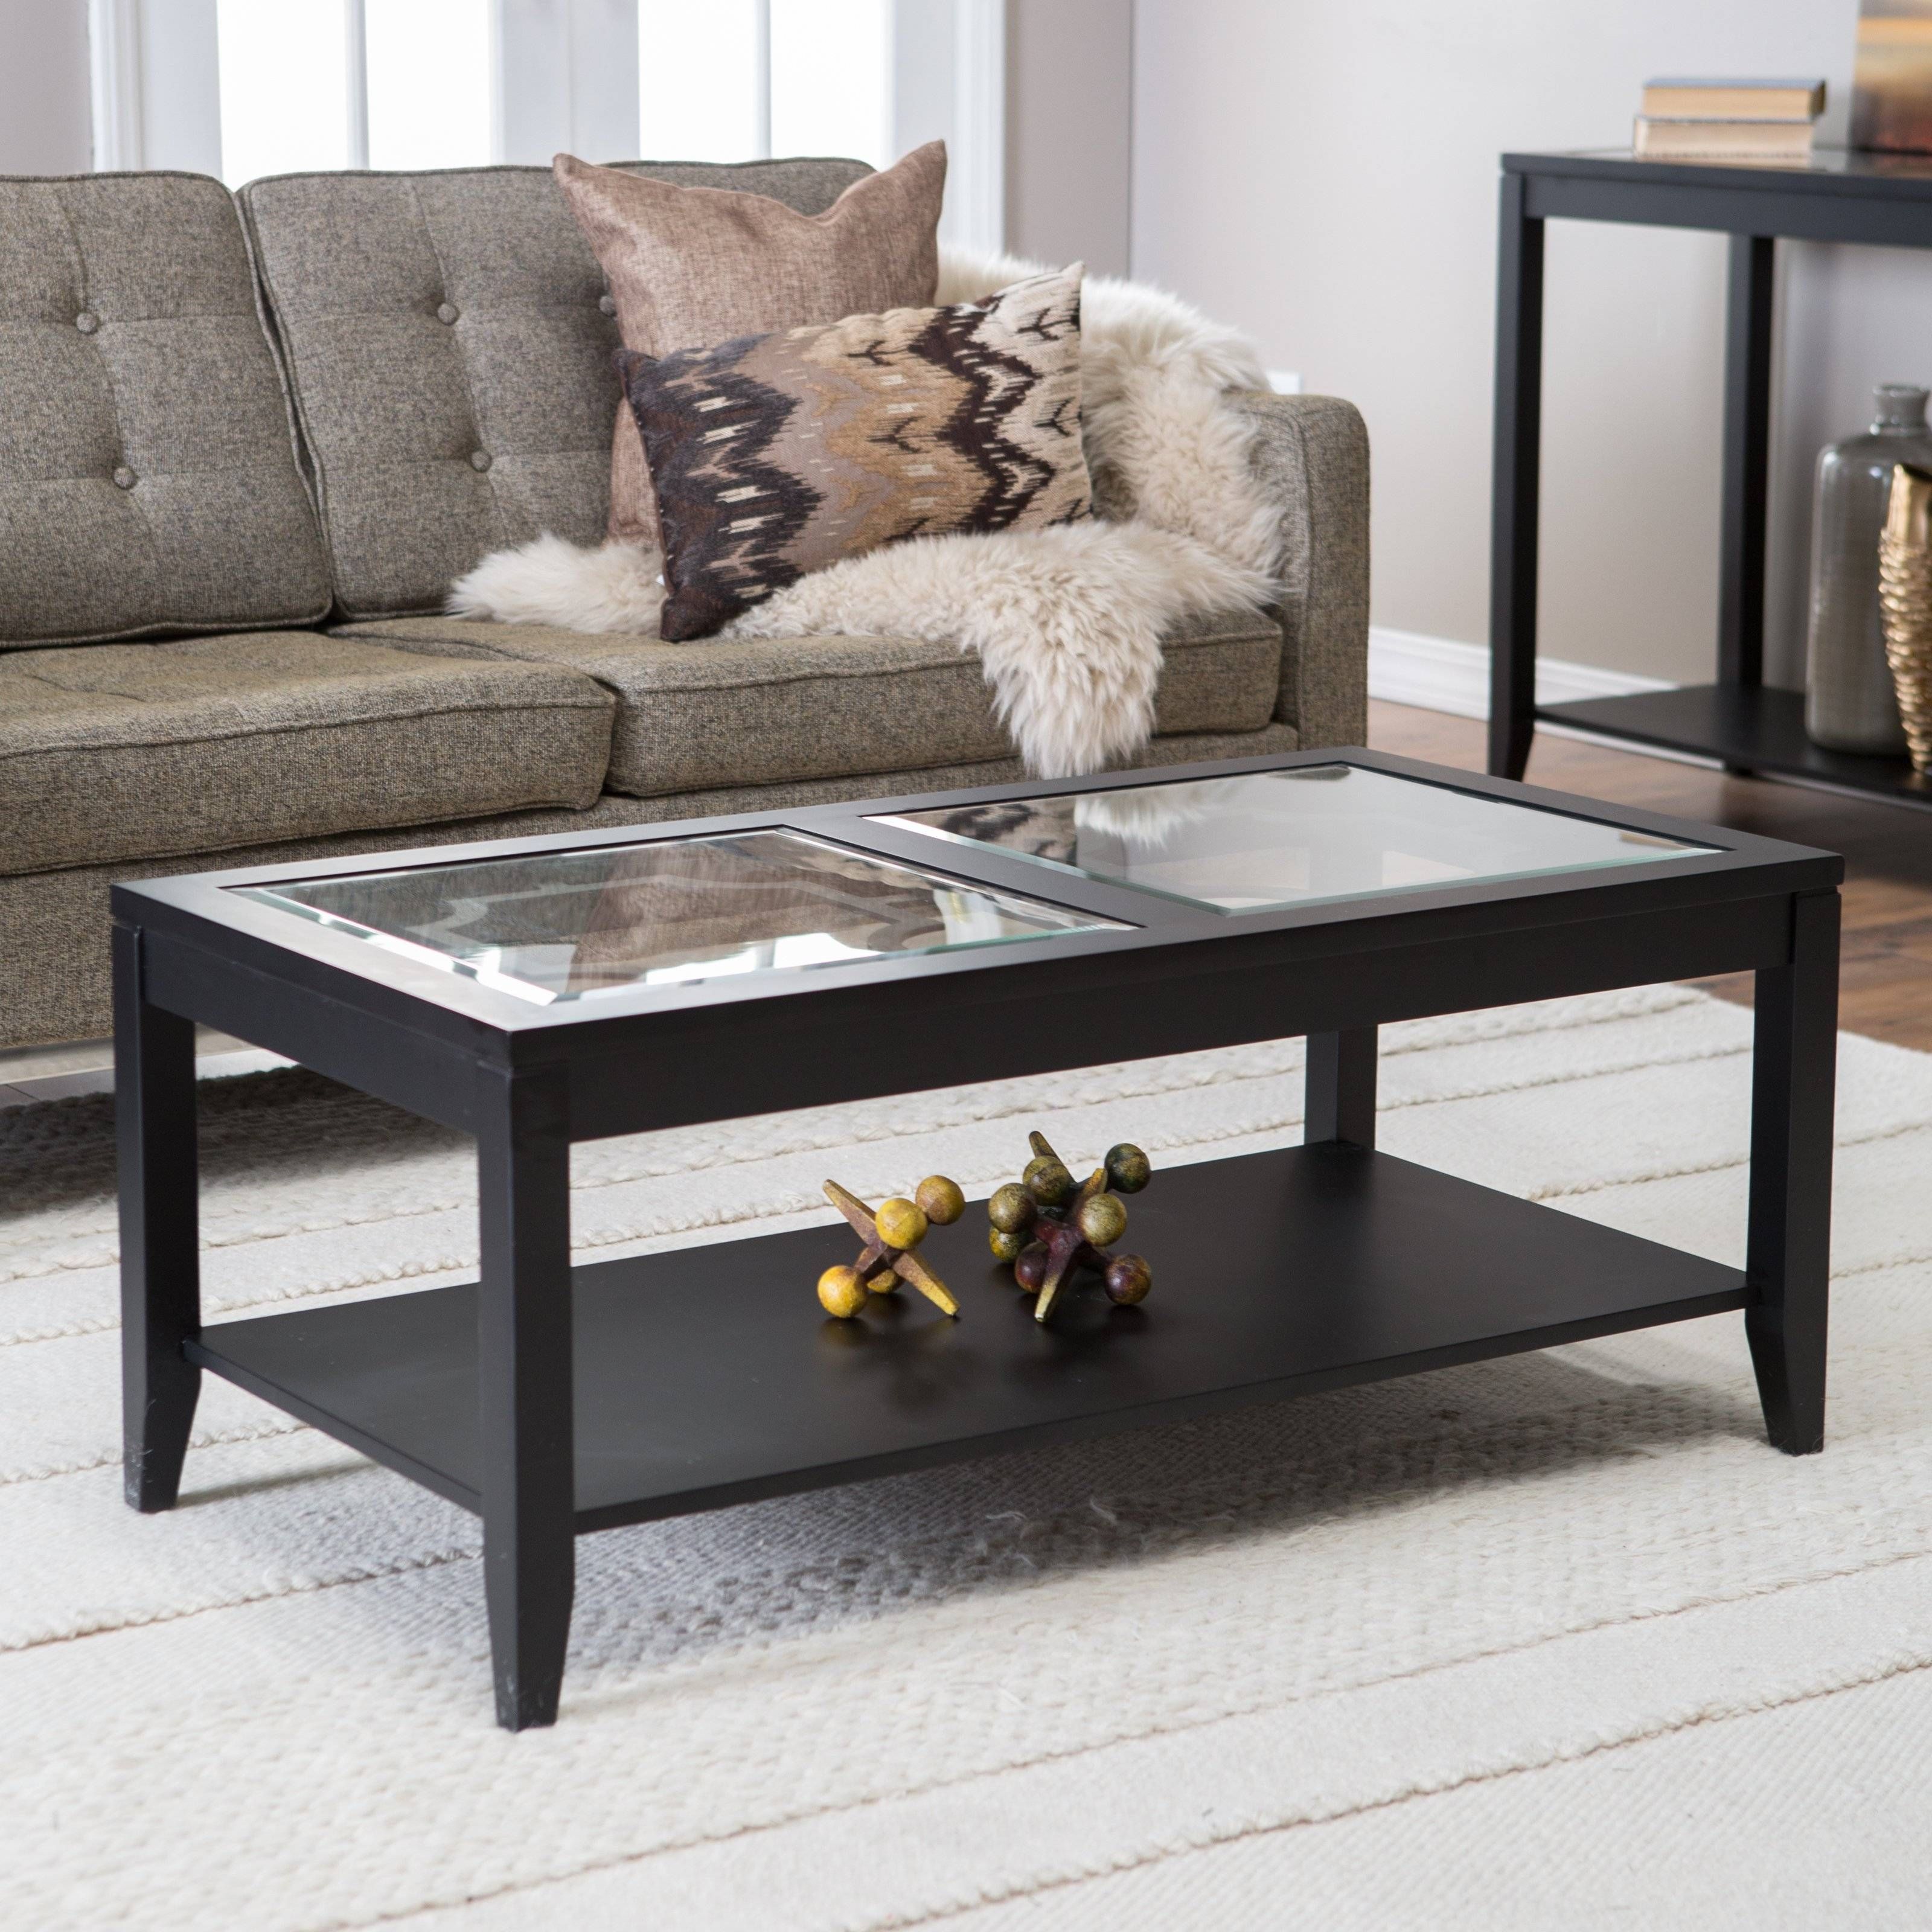 17 Inch Or Less Coffee Tables On Hayneedle – Short Coffee Tables Within Glass Lift Top Coffee Tables (View 5 of 30)